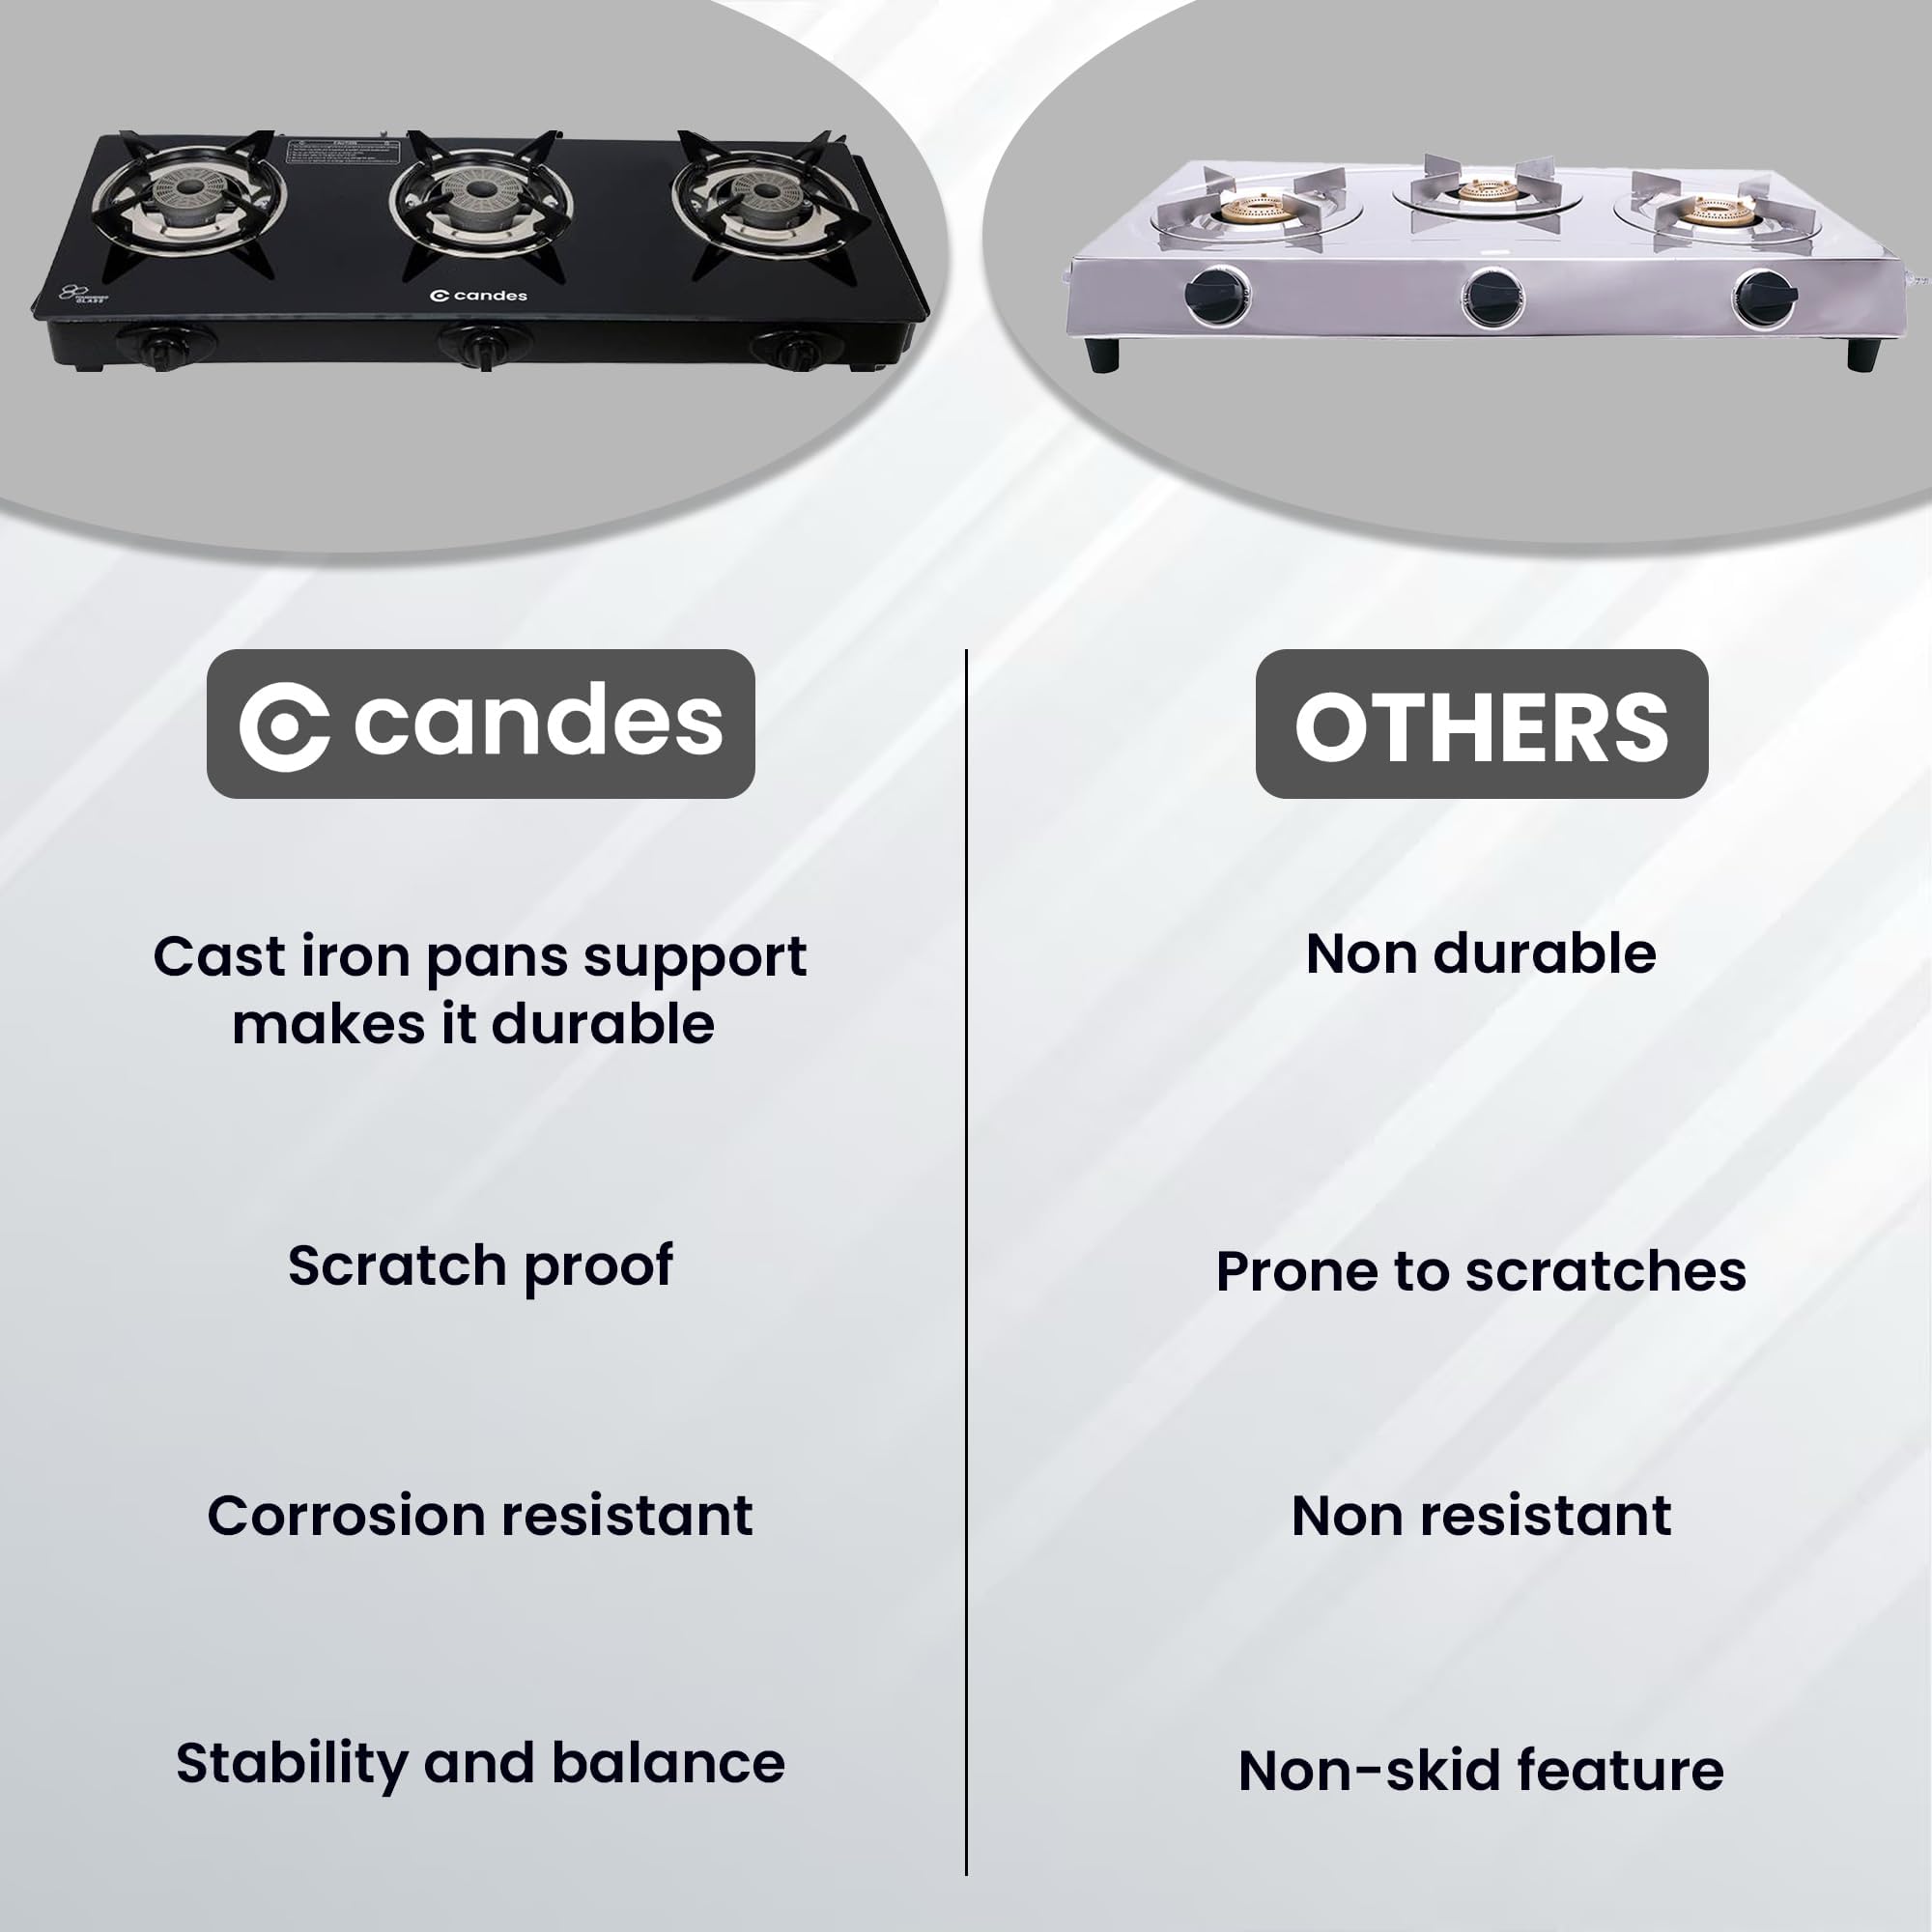 Candes Toughened Glass Automatic Burner Gas Stove |Automatic Ignition |Tornado Burner | Gas stove Chulha| Auto Ignition Gas stove|LPG Gas Stove|ISI Certified | 300 Days Warranty| (3 Burner Automatic)